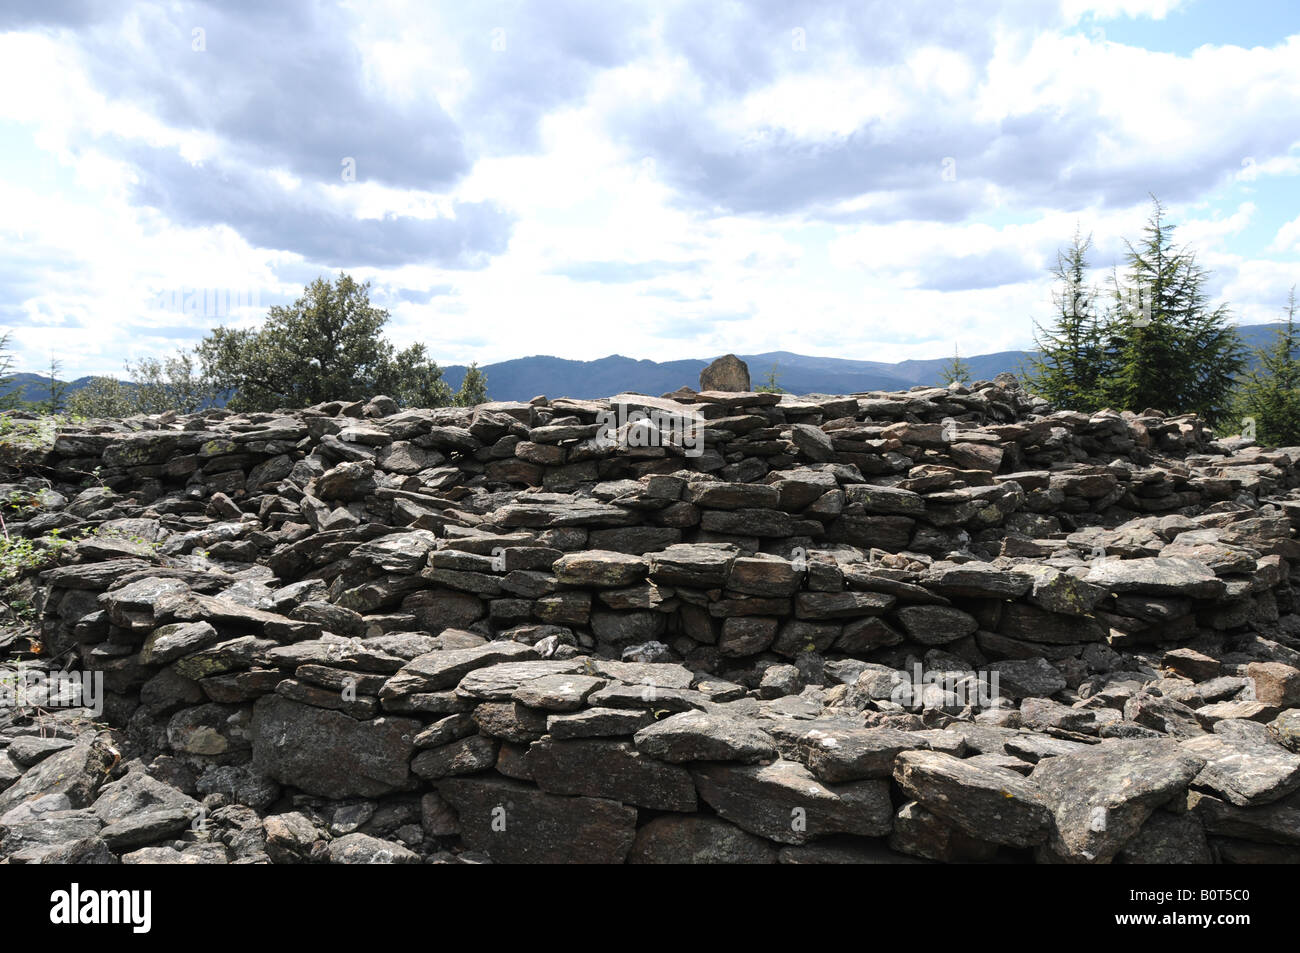 The late Bronze Age tumulus at Elzière in the Cévennes region of Southern France. Stock Photo